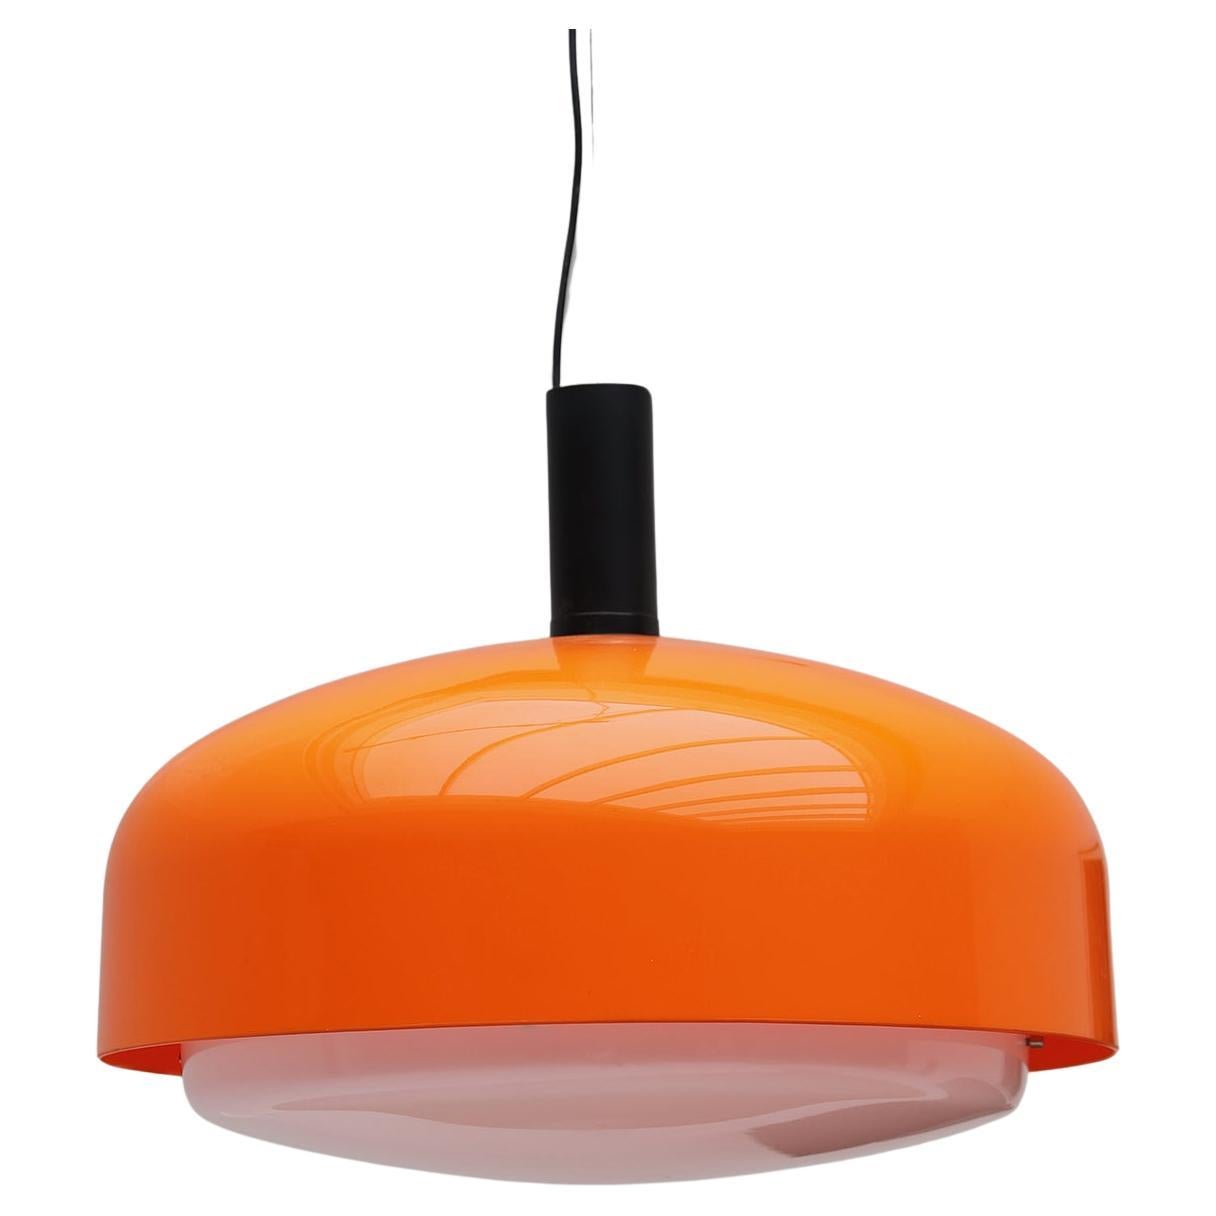 Large KD62 pending lamp by Eugenio Gentili Tedeschi designed for Kartell in 1965 For Sale